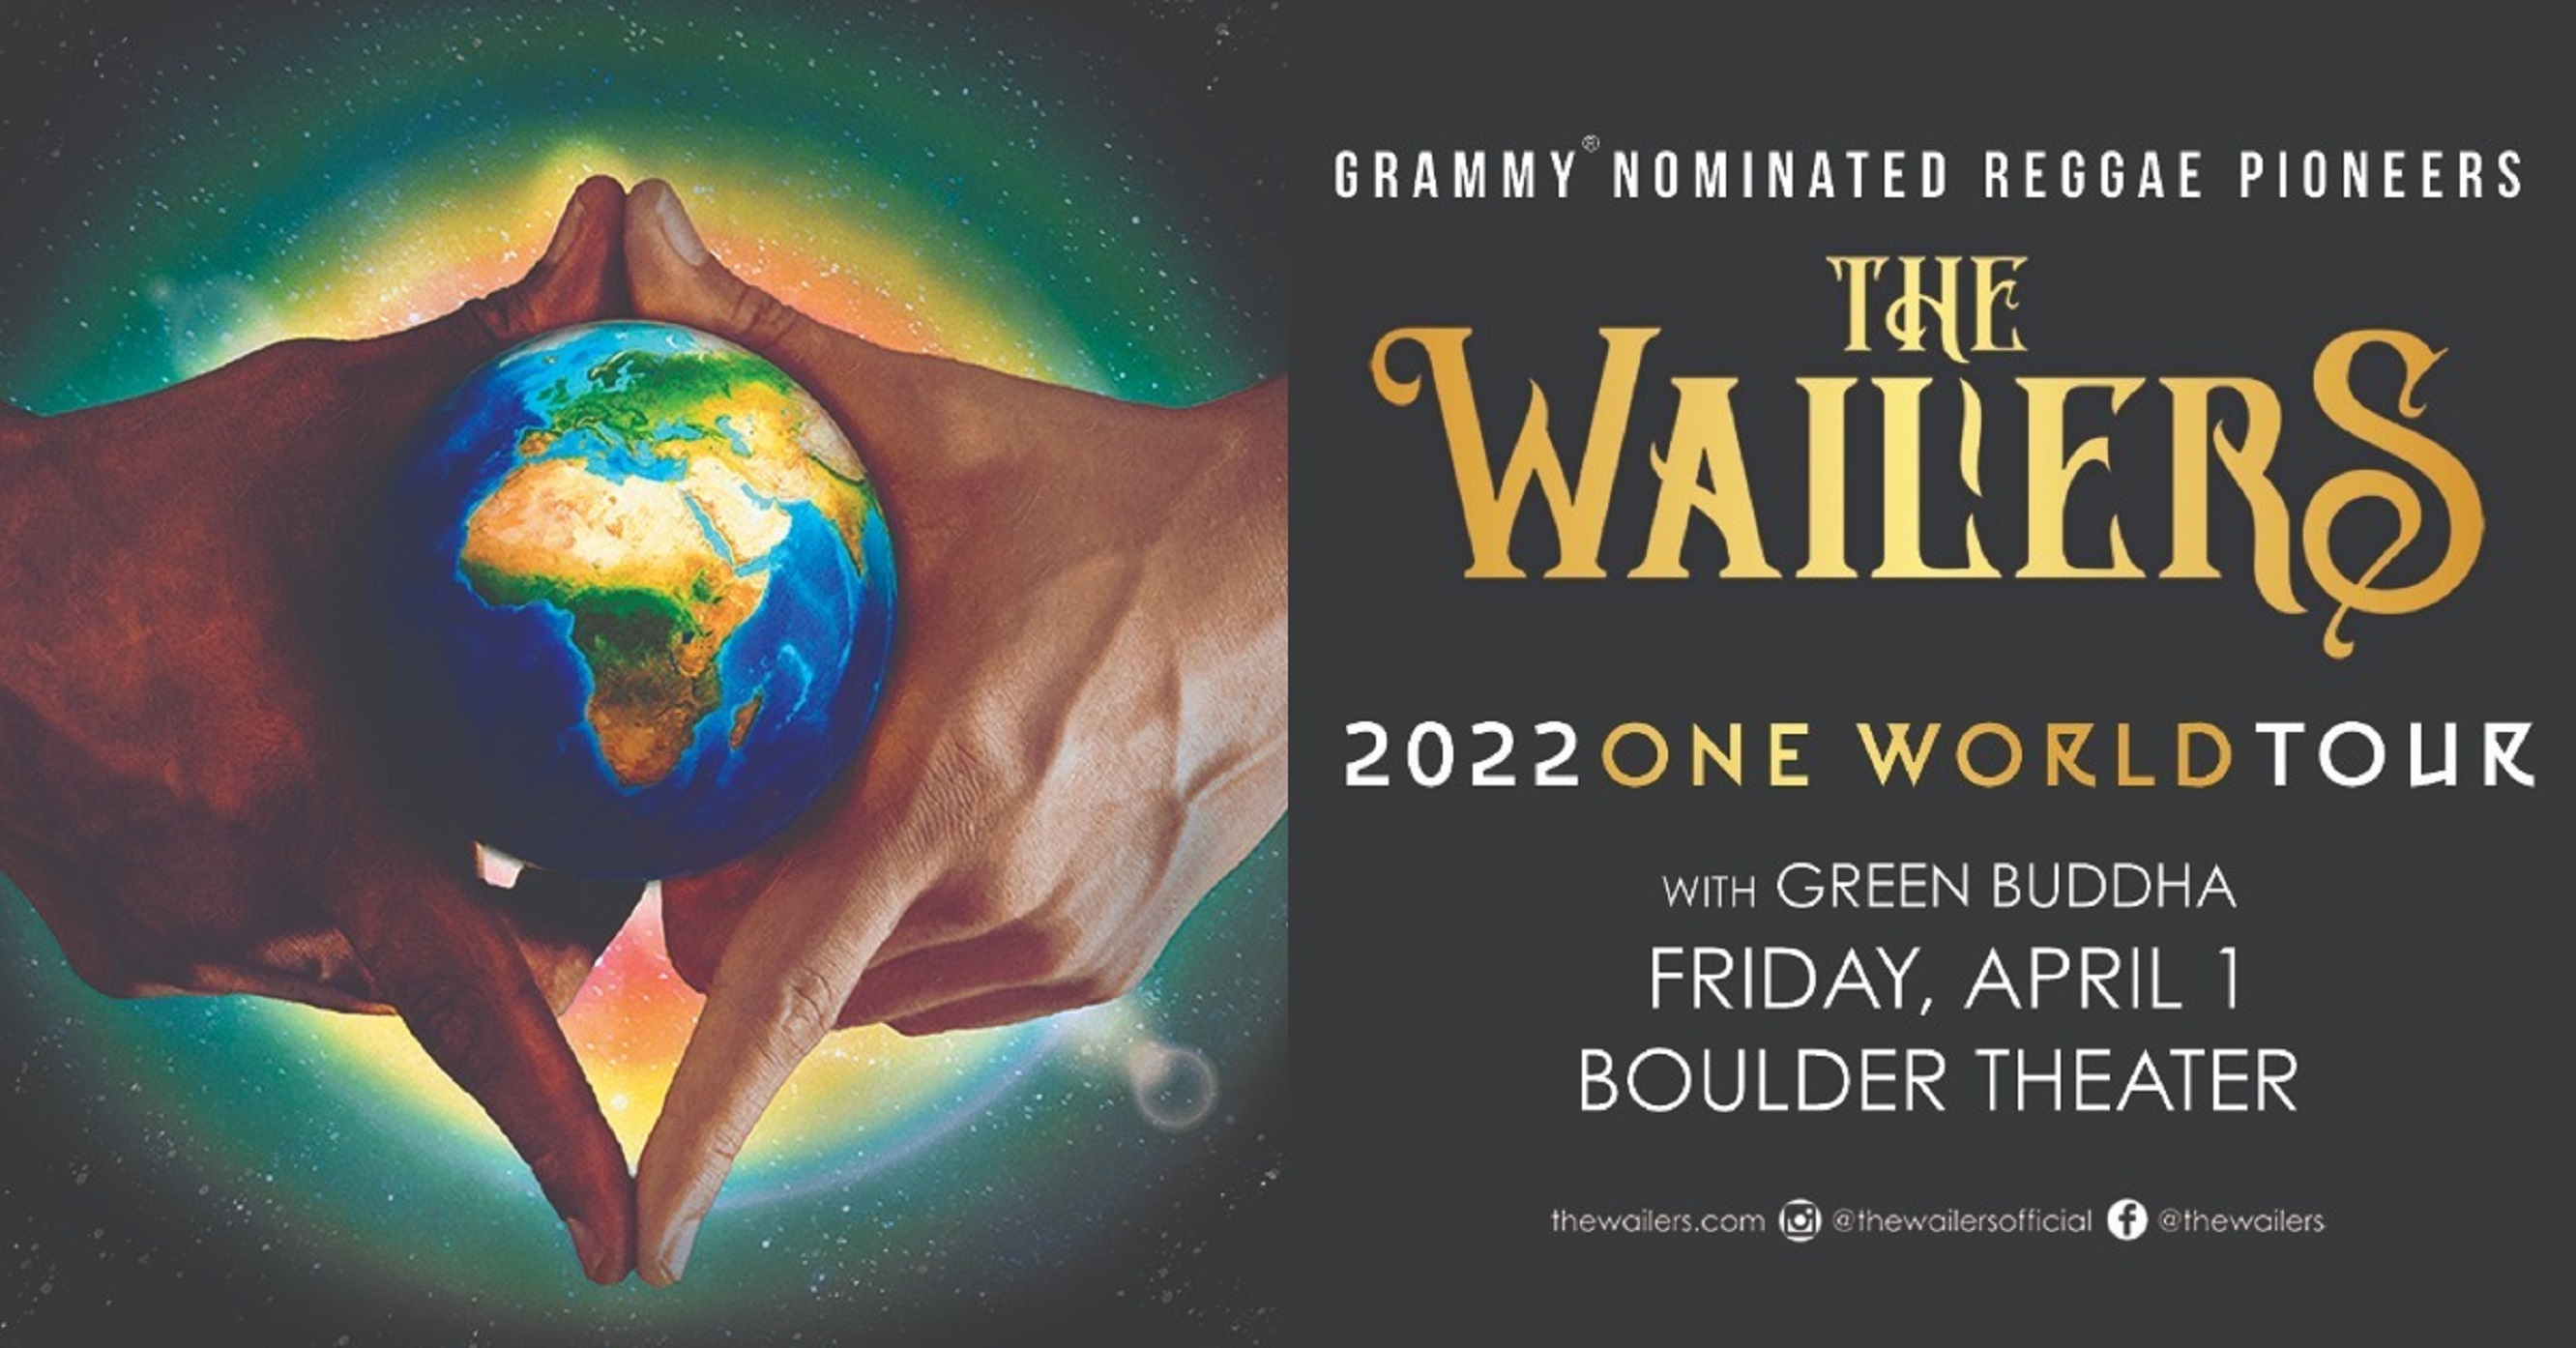 The Wailers to play Boulder Theater on April 1st, 2022